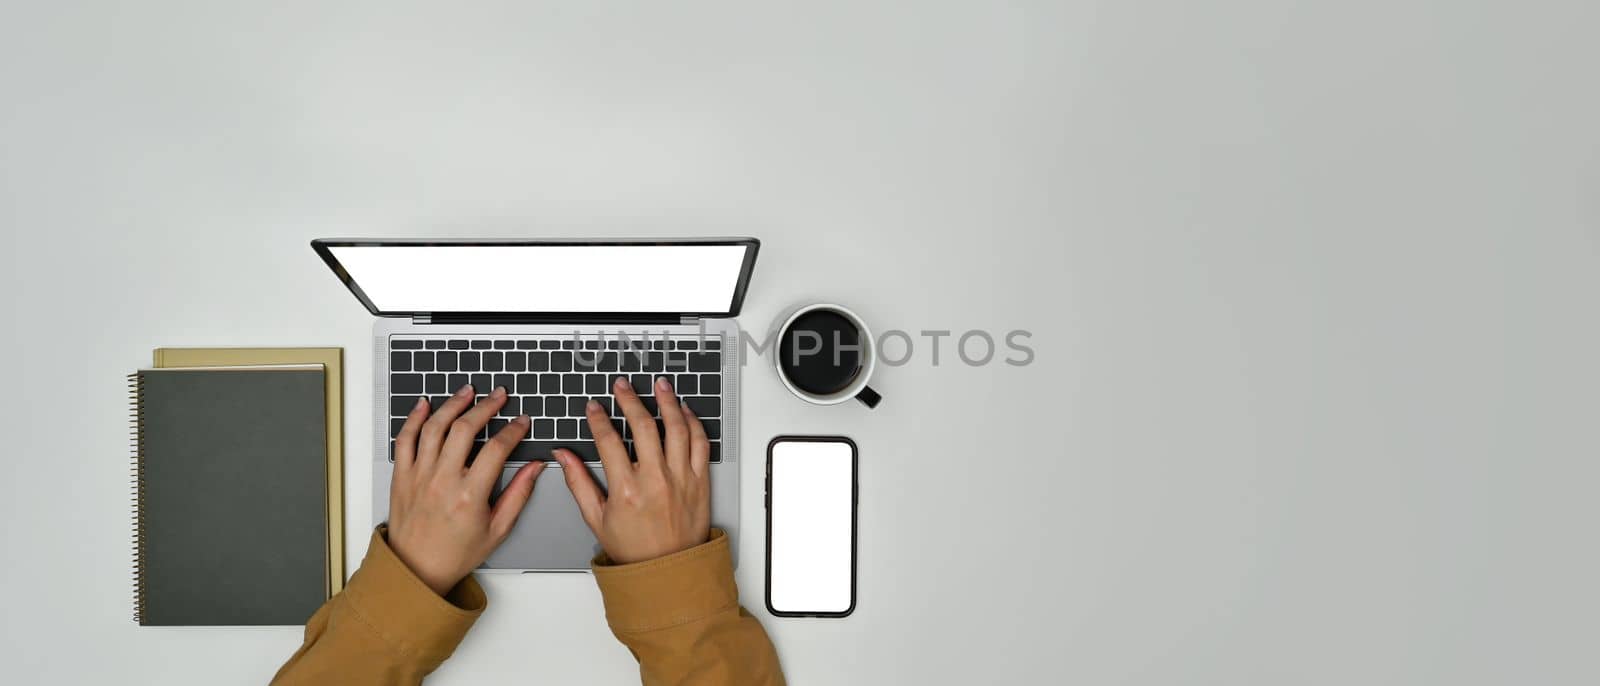 From above view of man hands typing on laptop computer over white background. Top view with copy space for advertise text.